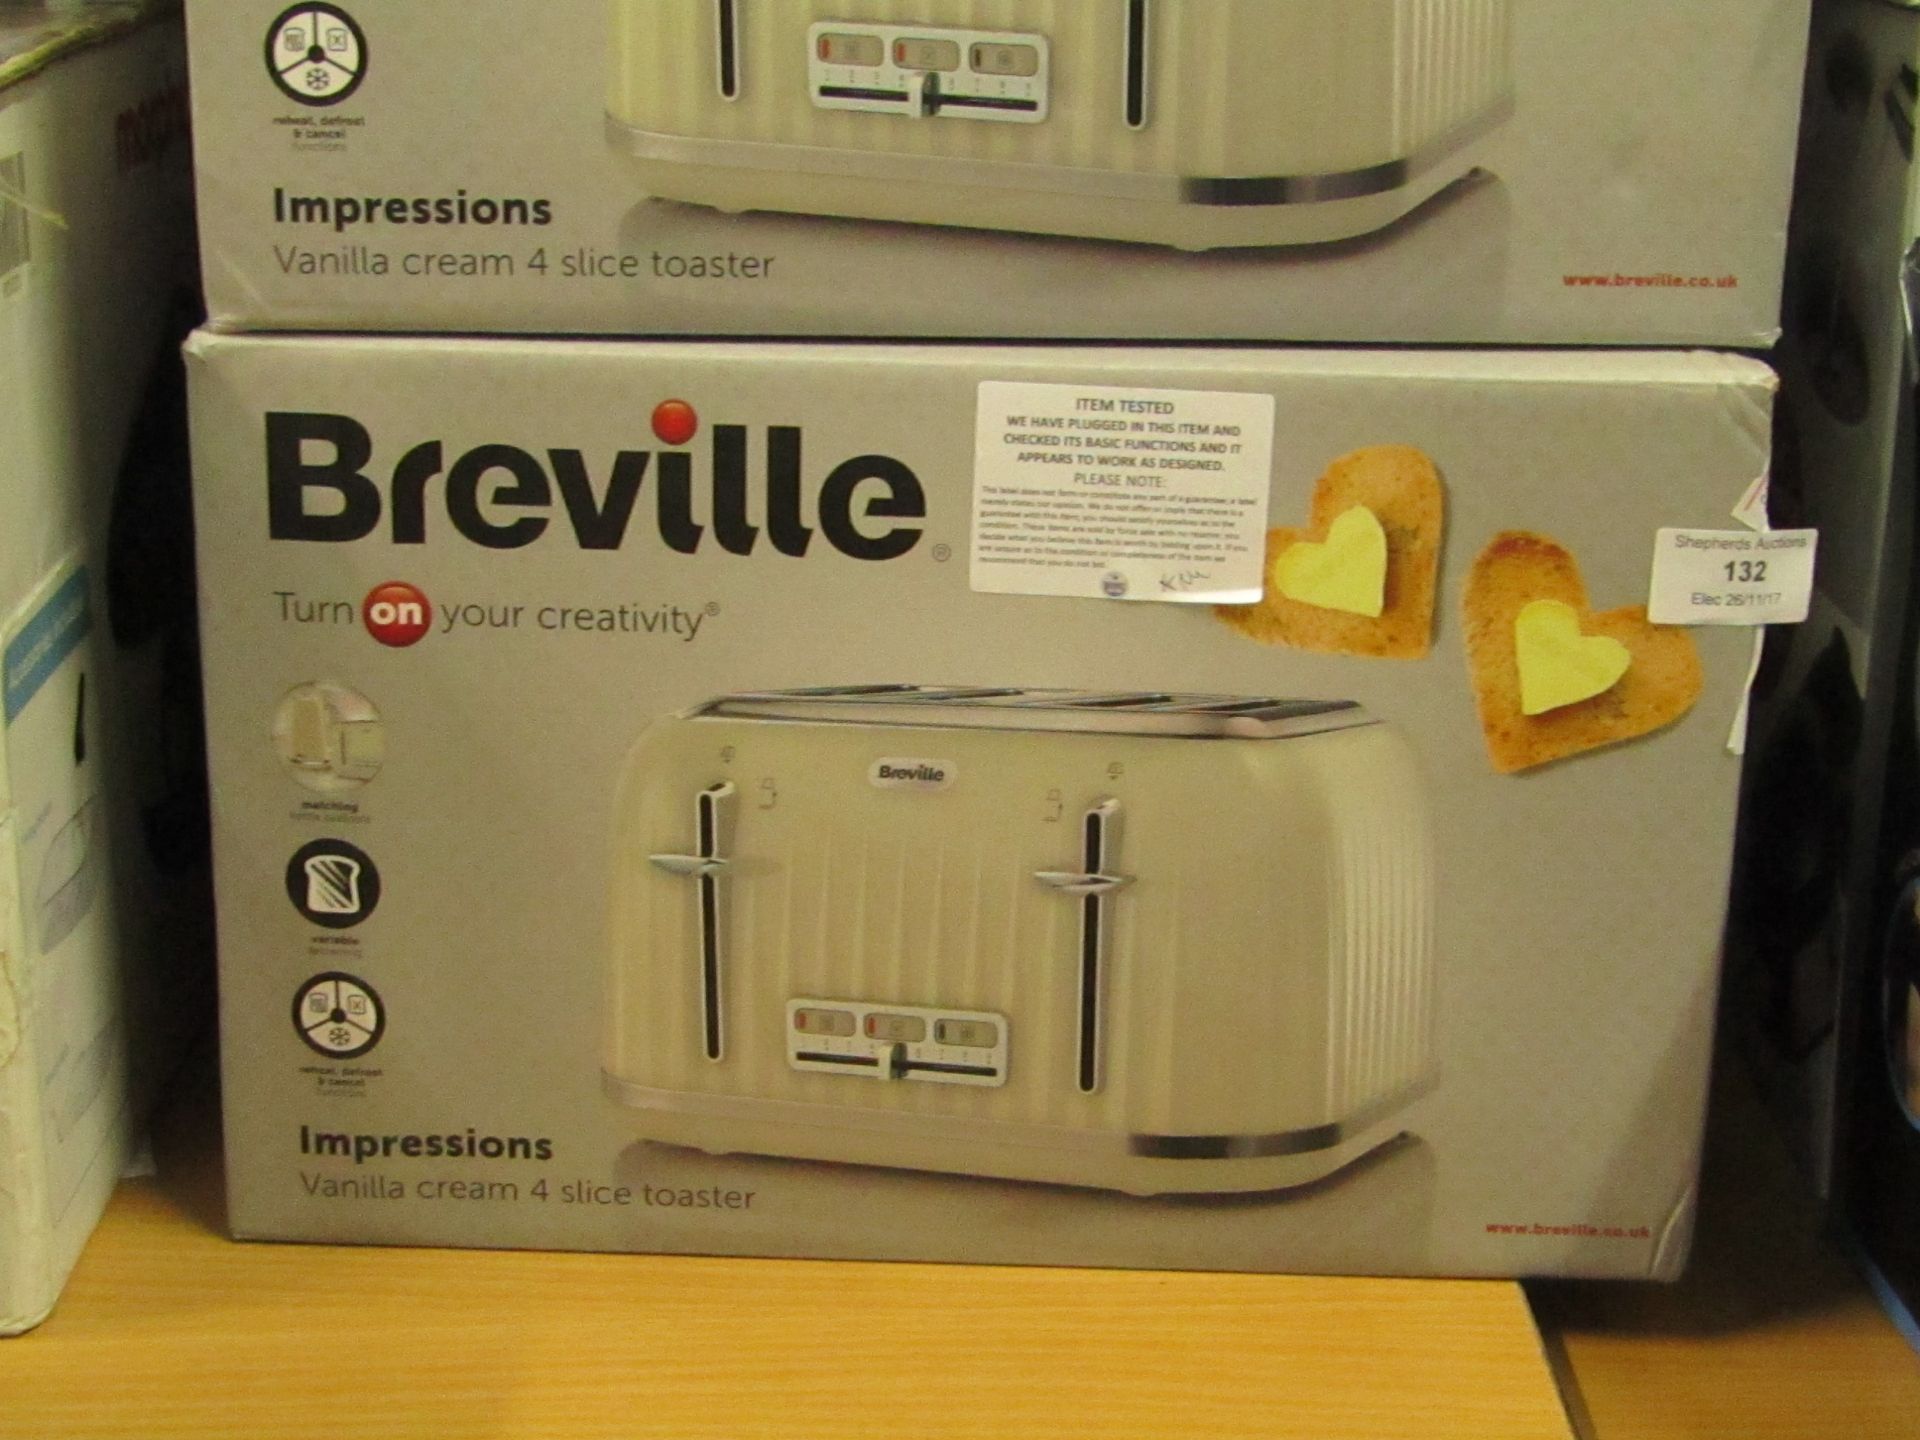 Breville 4 slice Impressions Vanilla Cream Toaster, tested working and boxed